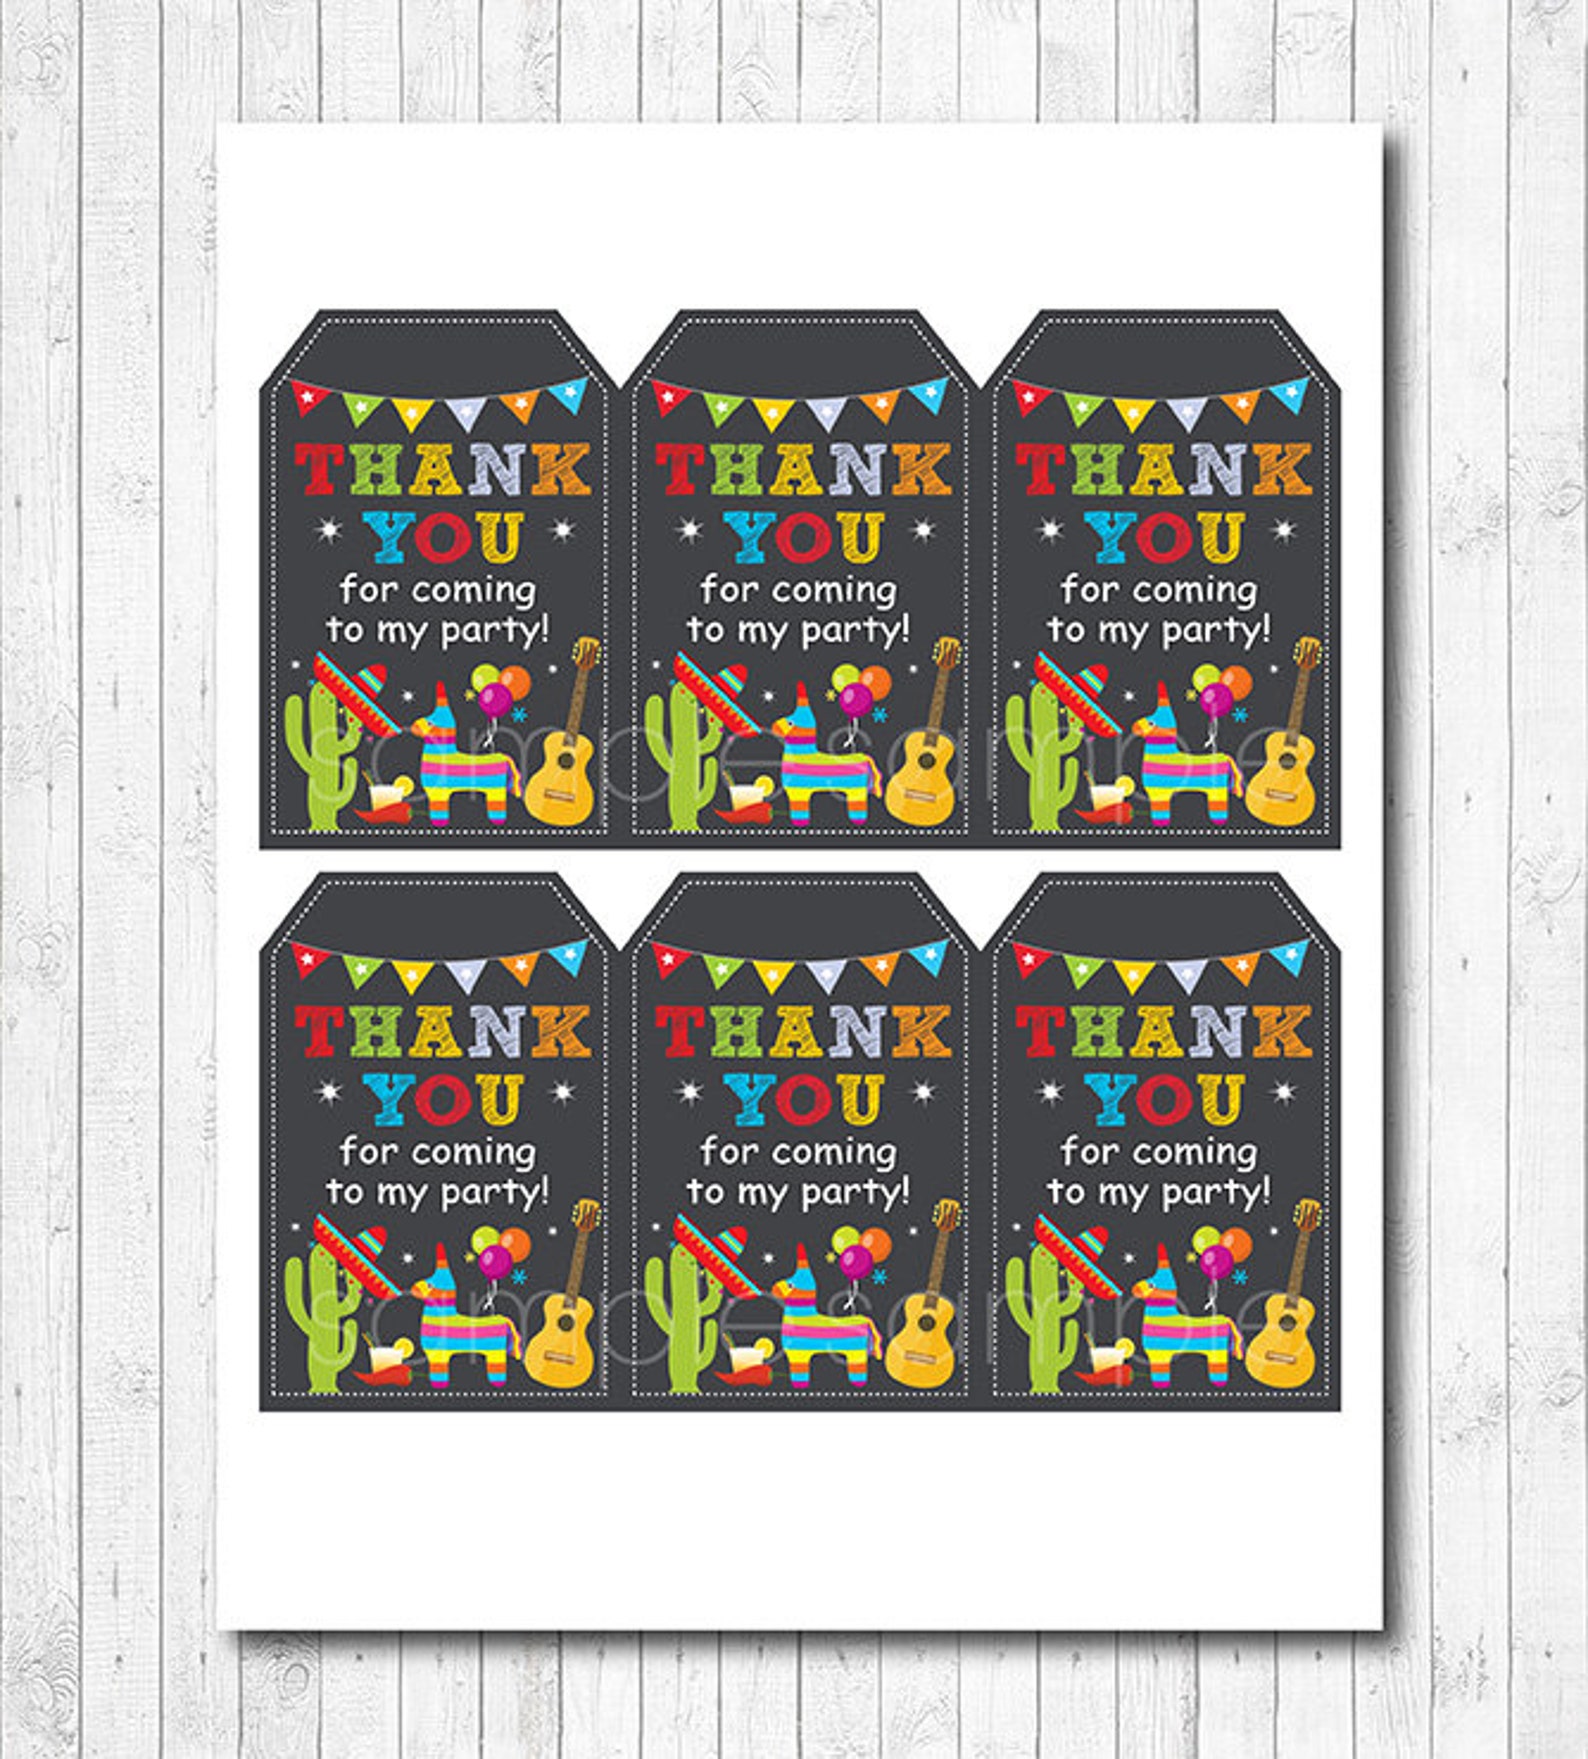 fiesta-party-thank-you-tags-printable-fiesta-thank-you-favor-tags-first-fiesta-thank-you